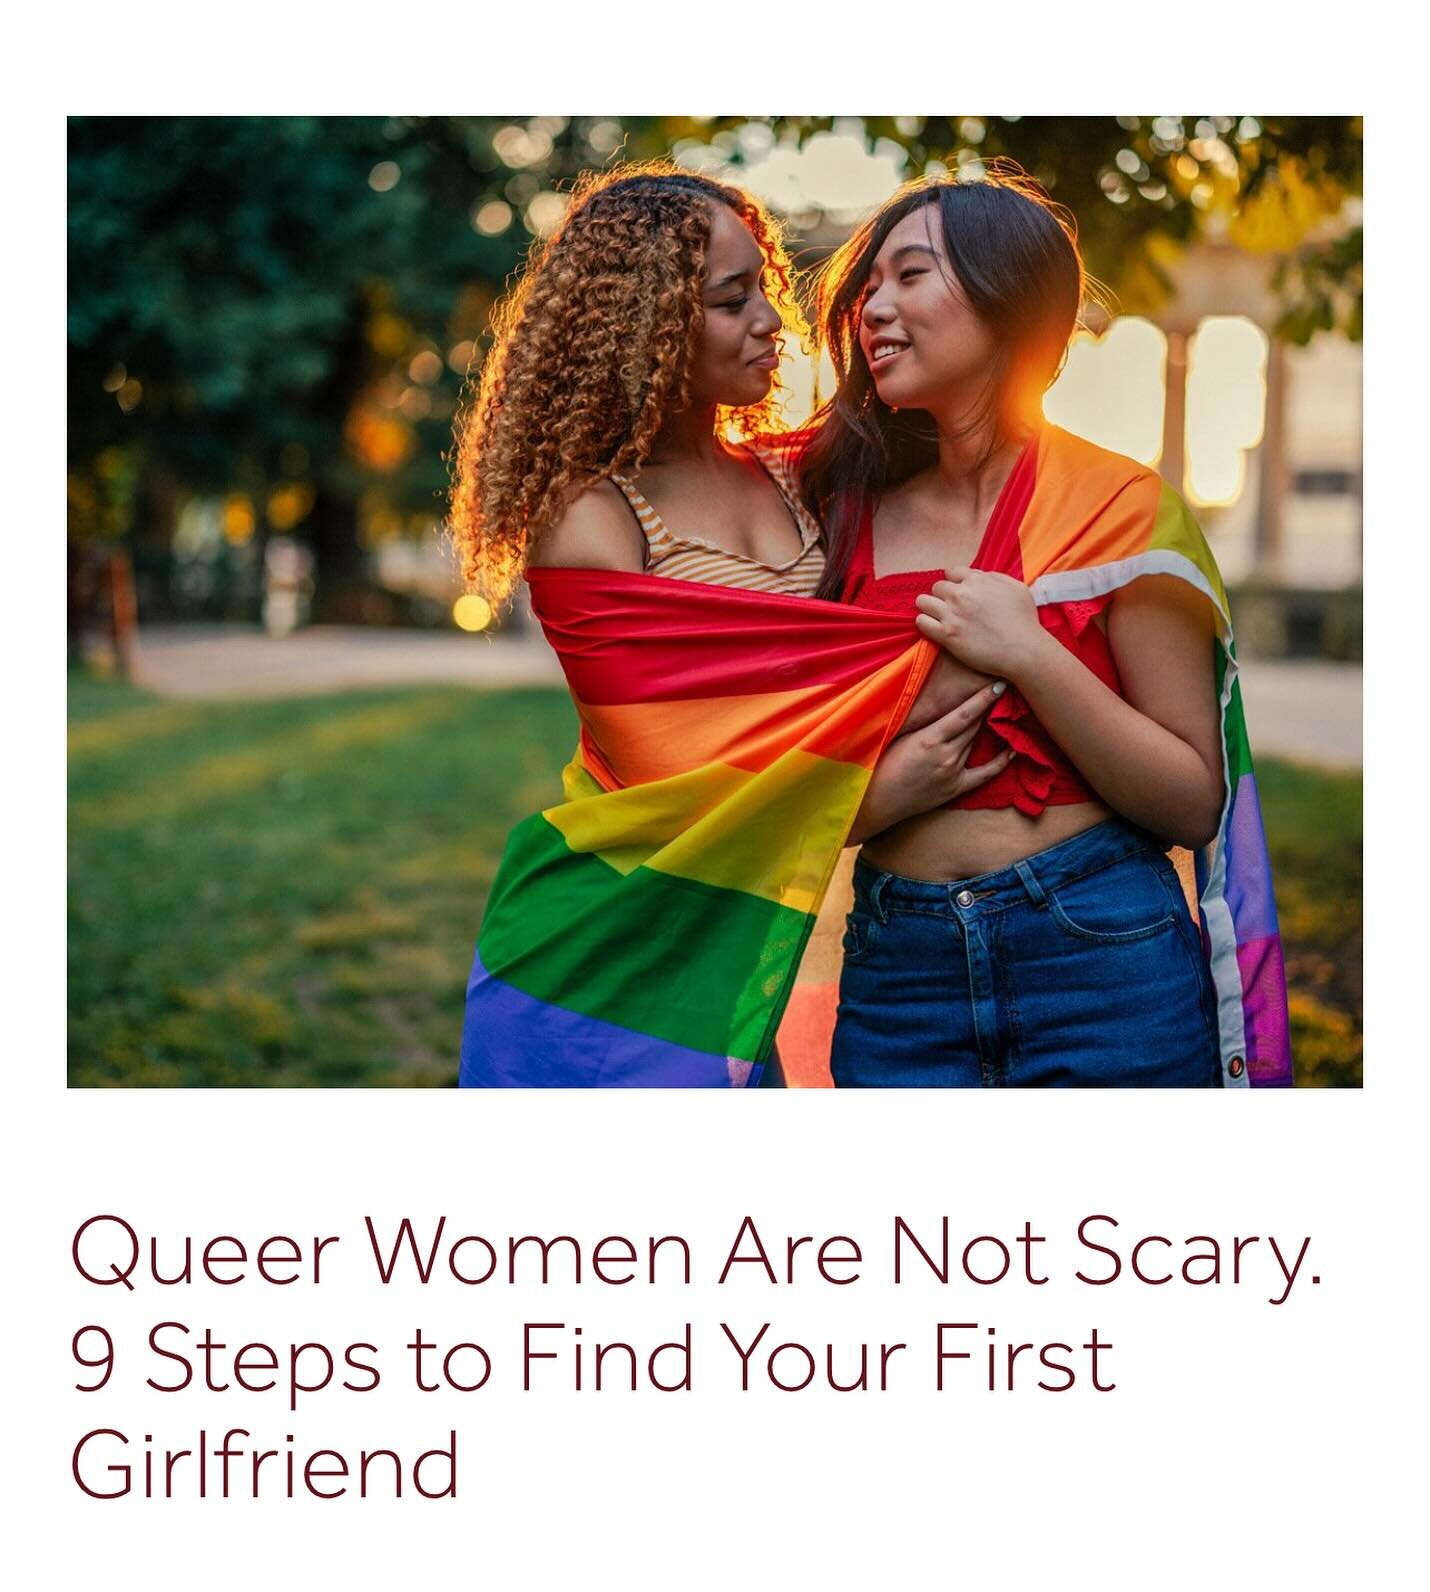 &ldquo;It&rsquo;s time to ditch the &ldquo;scary lesbian&rdquo; trope in favor of queer community, friendship and love. No queer dating experience? No problem. Follow these nine simple steps to find your first girlfriend.&rdquo; &mdash;@skynoire

#Me